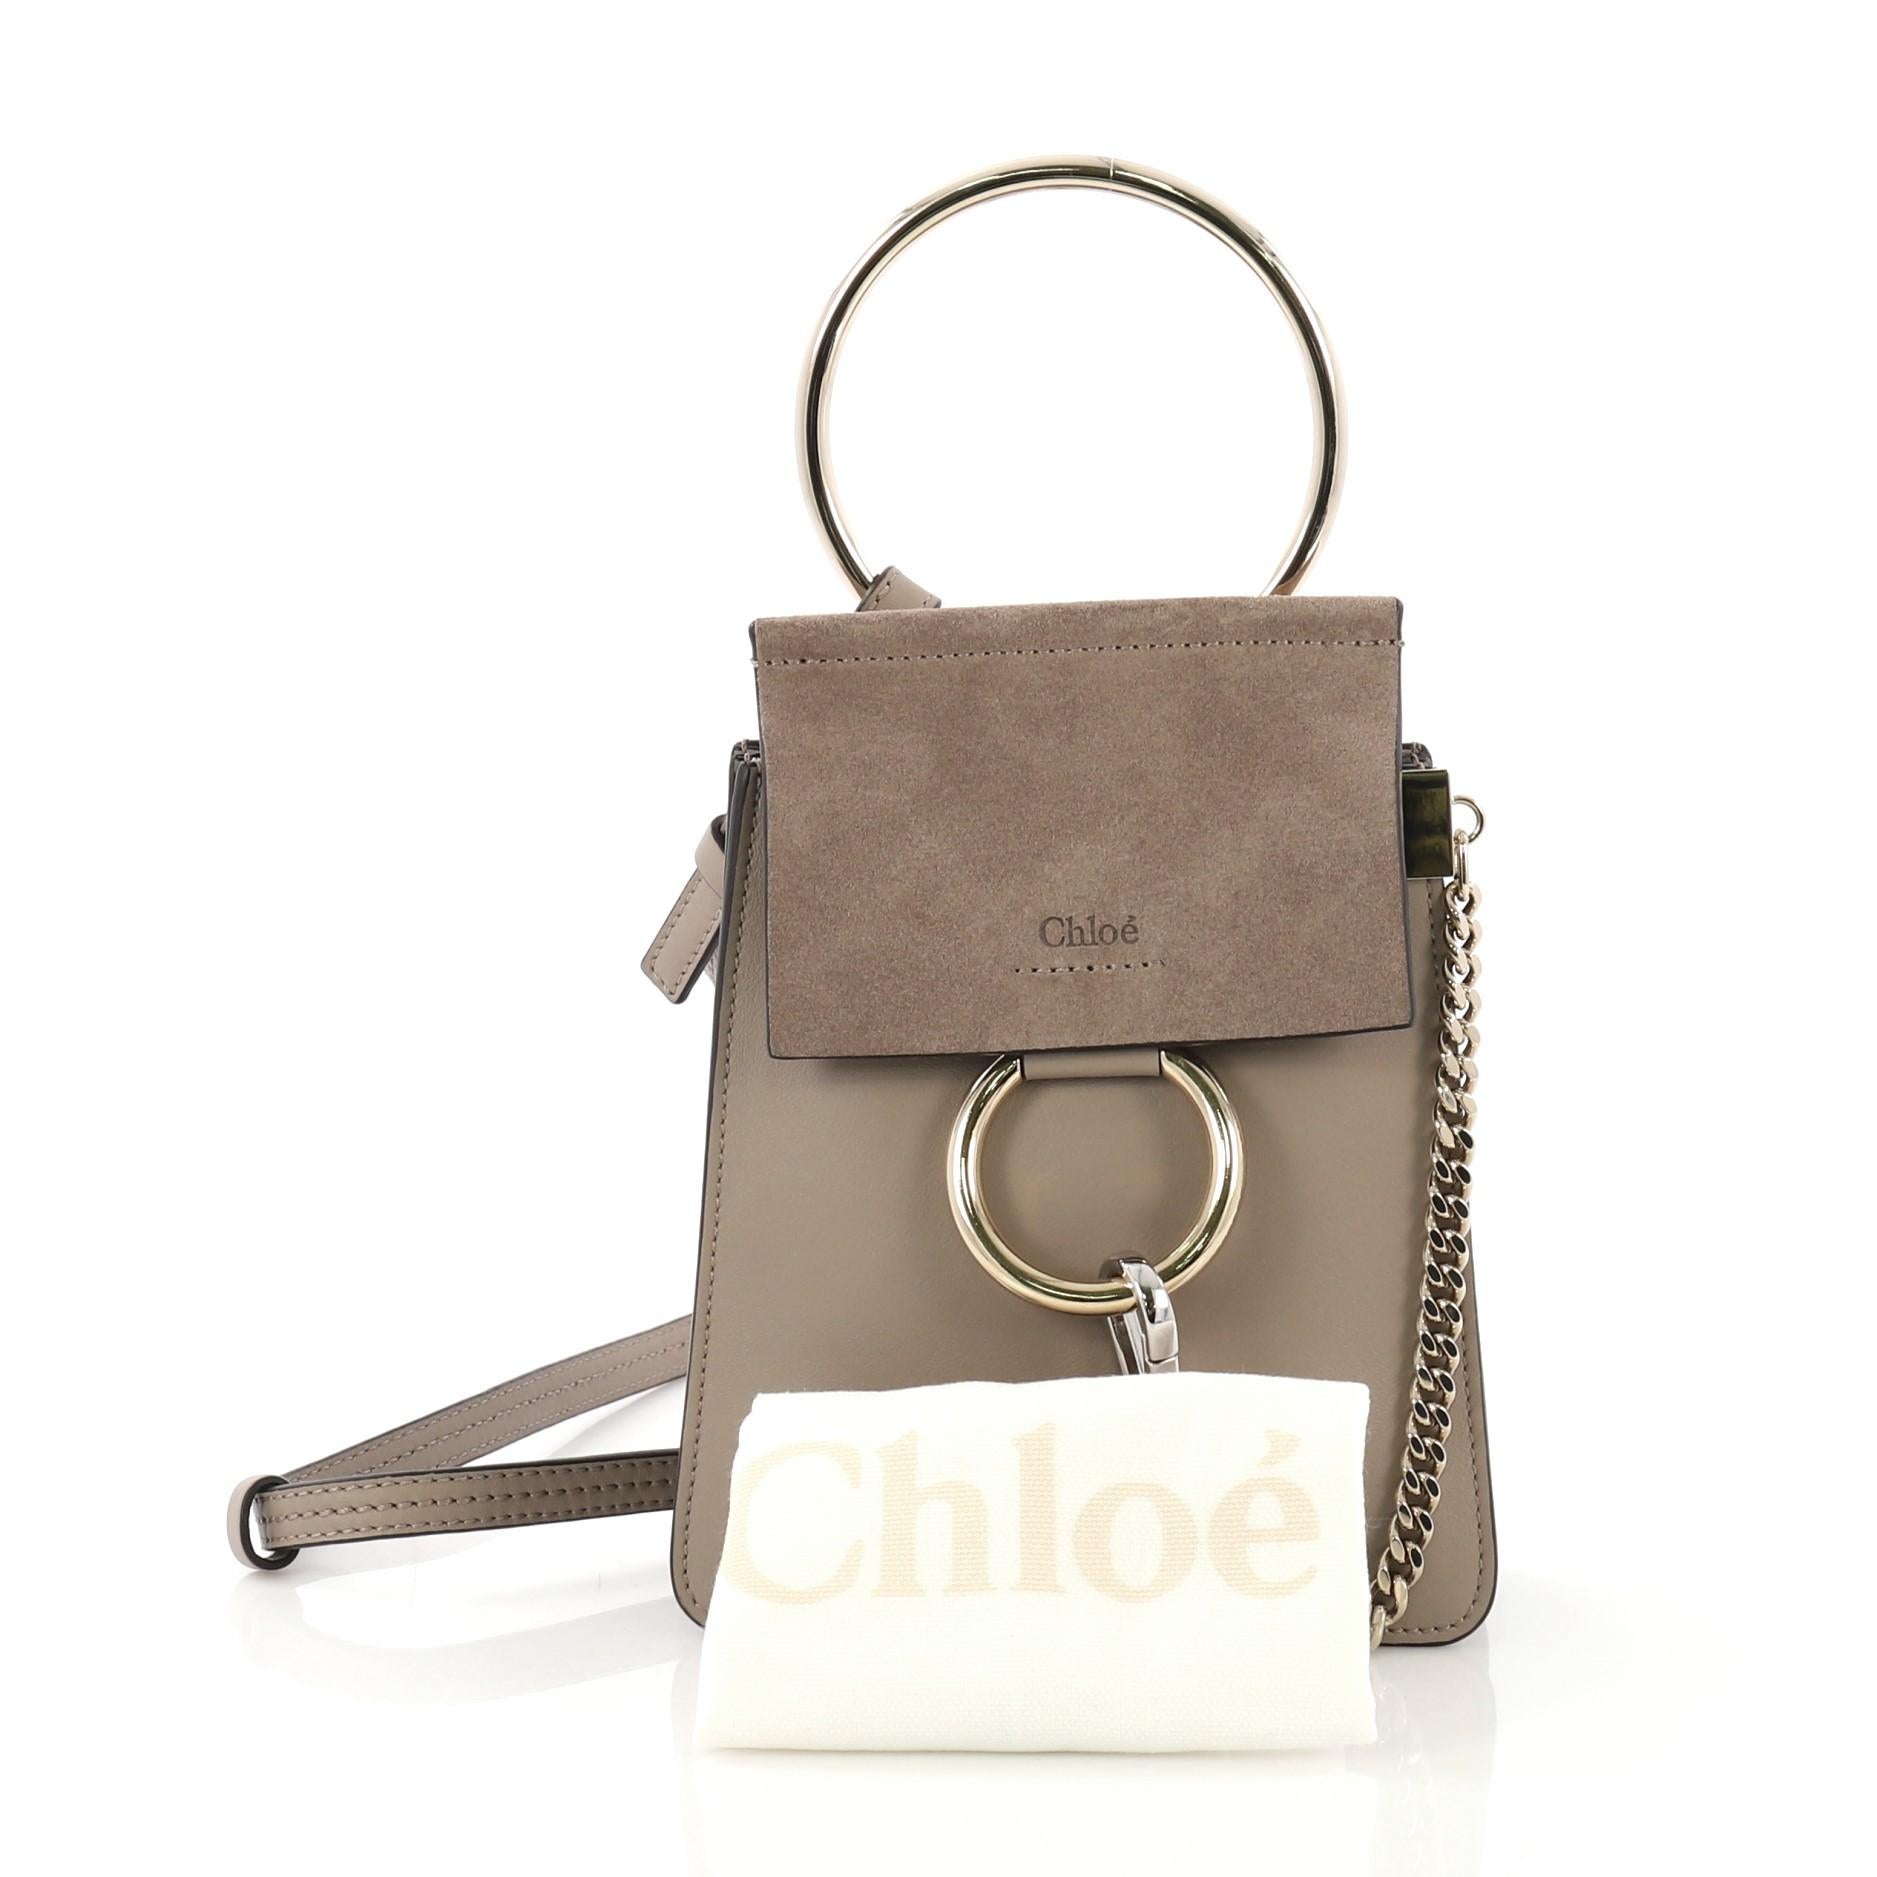 This Chloe Faye Bracelet Crossbody Bag Leather and Suede Mini, crafted from taupe leather, features an adjustable crossbody strap, ring detail and chain, side snap buttons, and gold-tone hardware. Its magnetic snap closure opens to a taupe suede